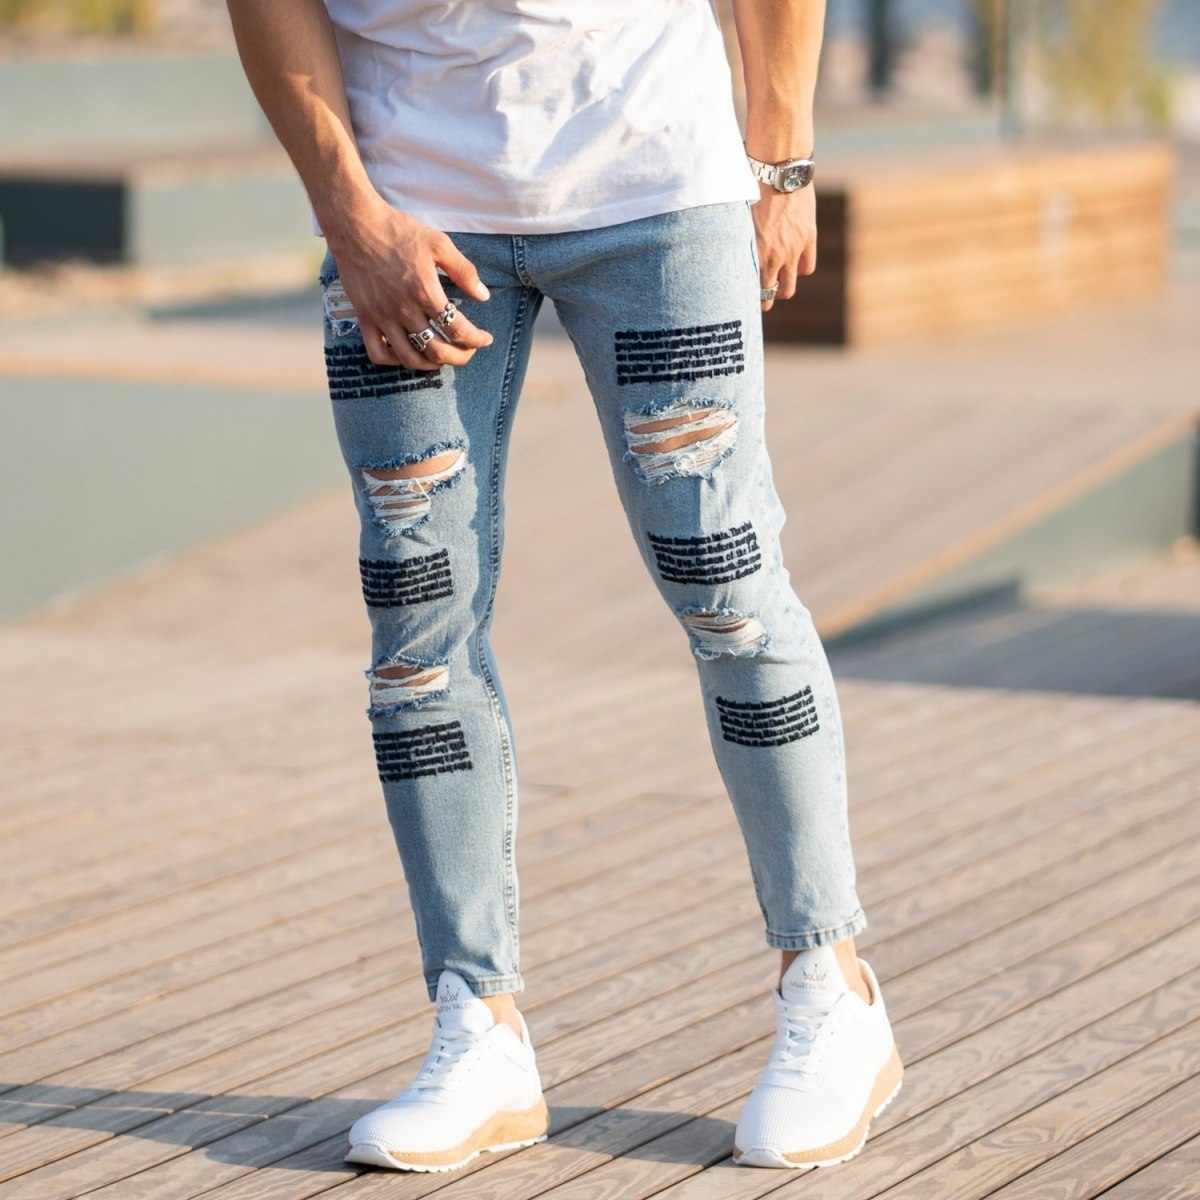 Men's Jeans With Fonts and Ribs